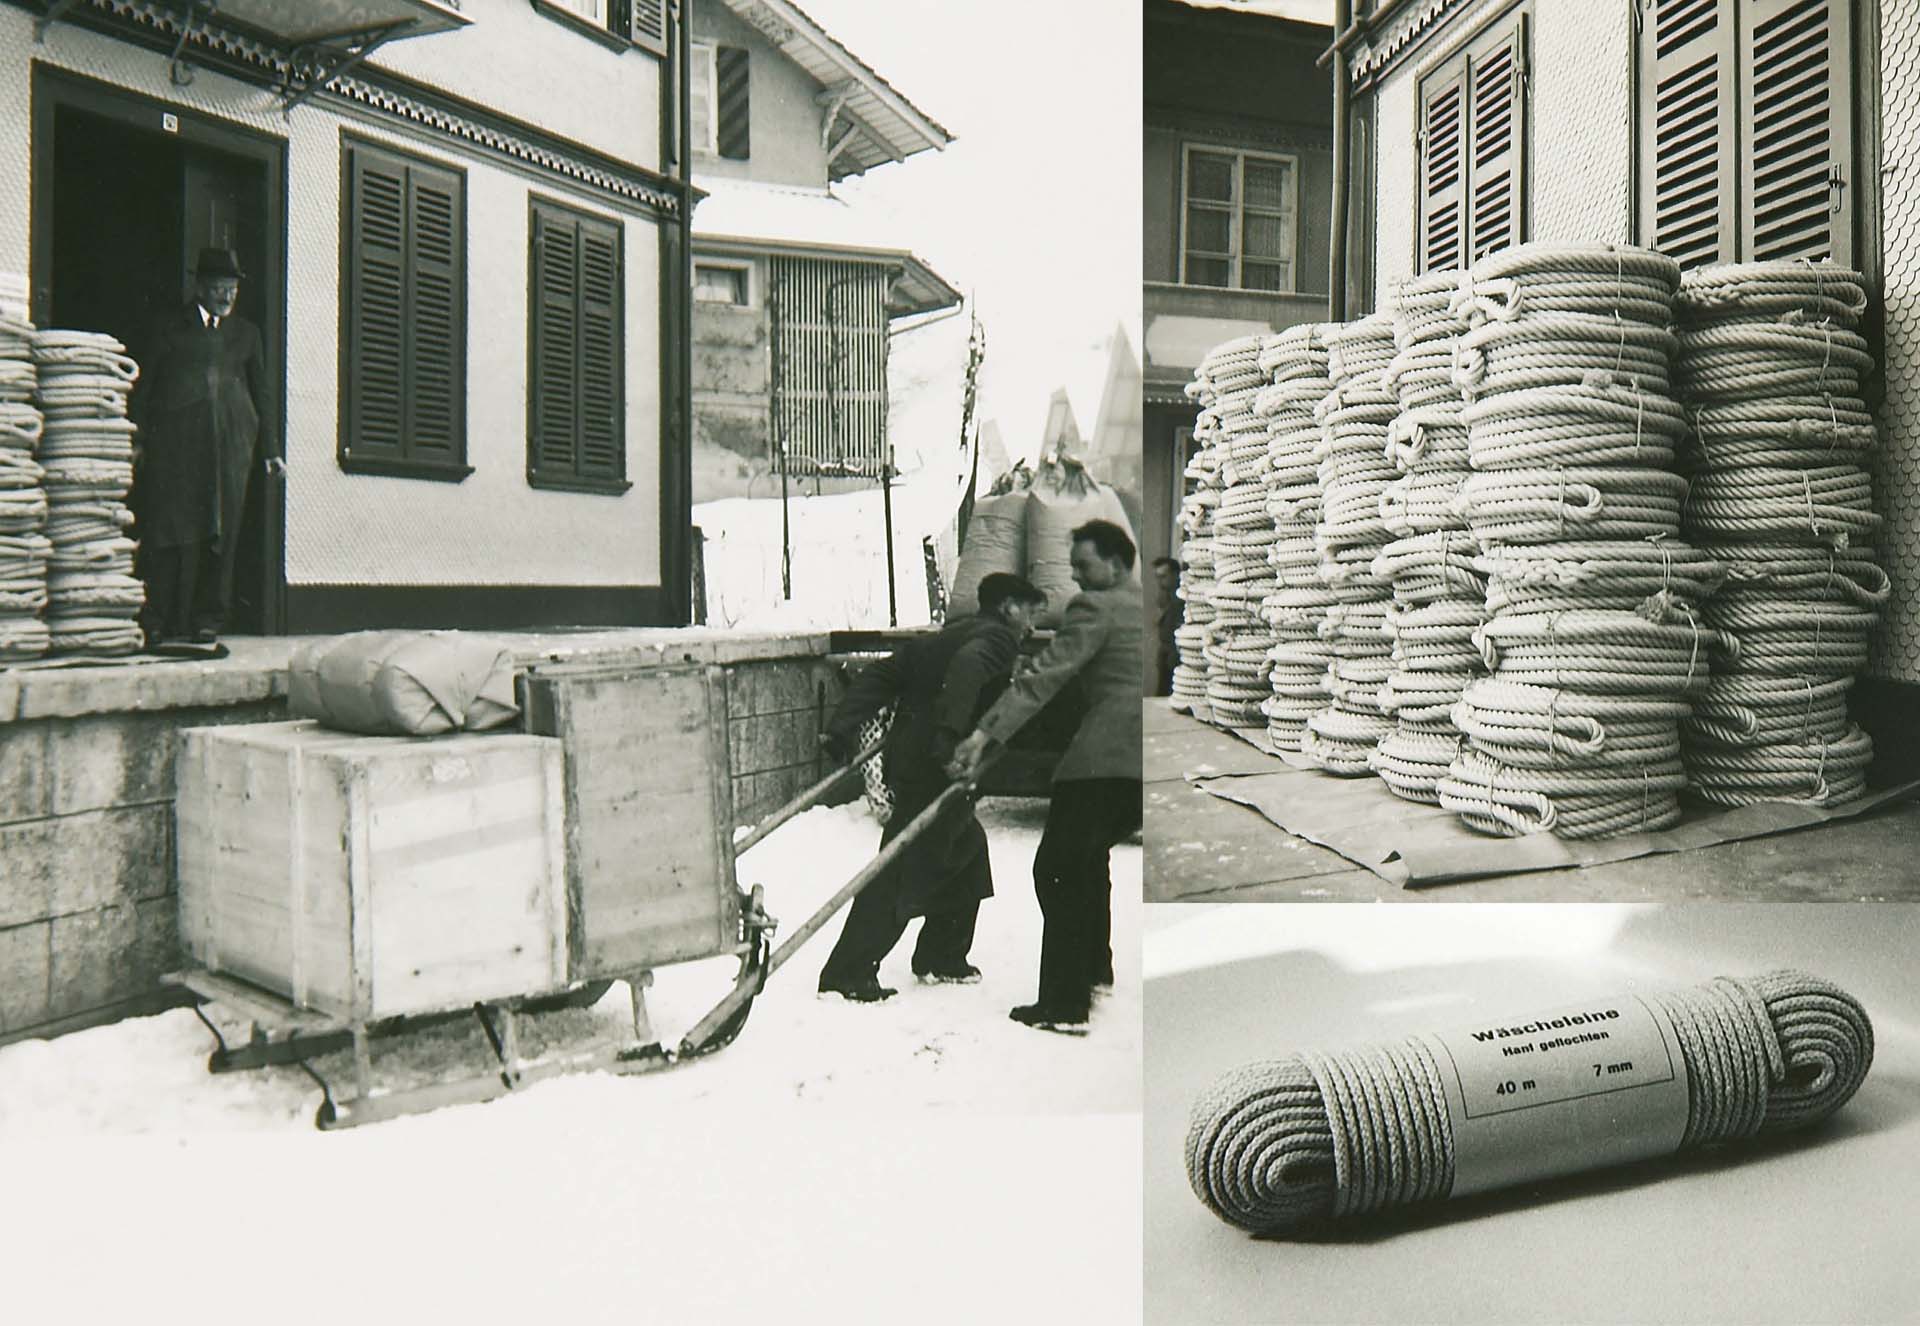 Transport of the products, hemp ropes, by sleigh to Trubschachen station in the 1950s